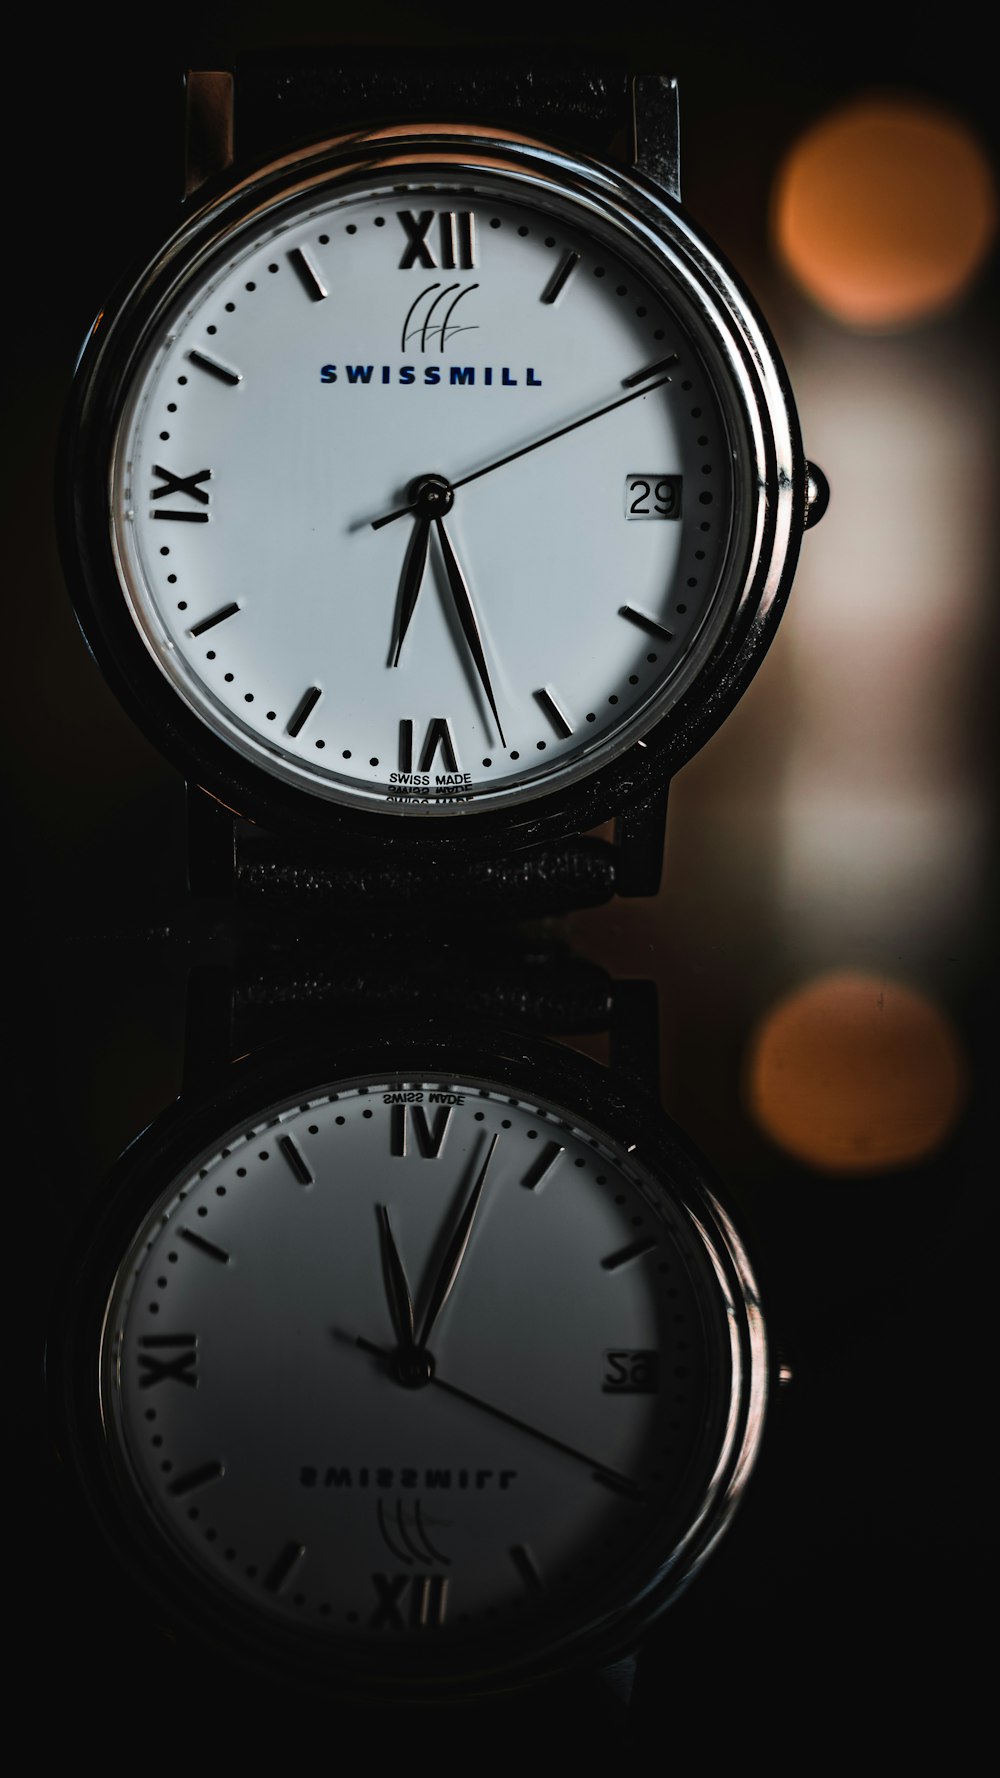 black and white analog watch at 10 10